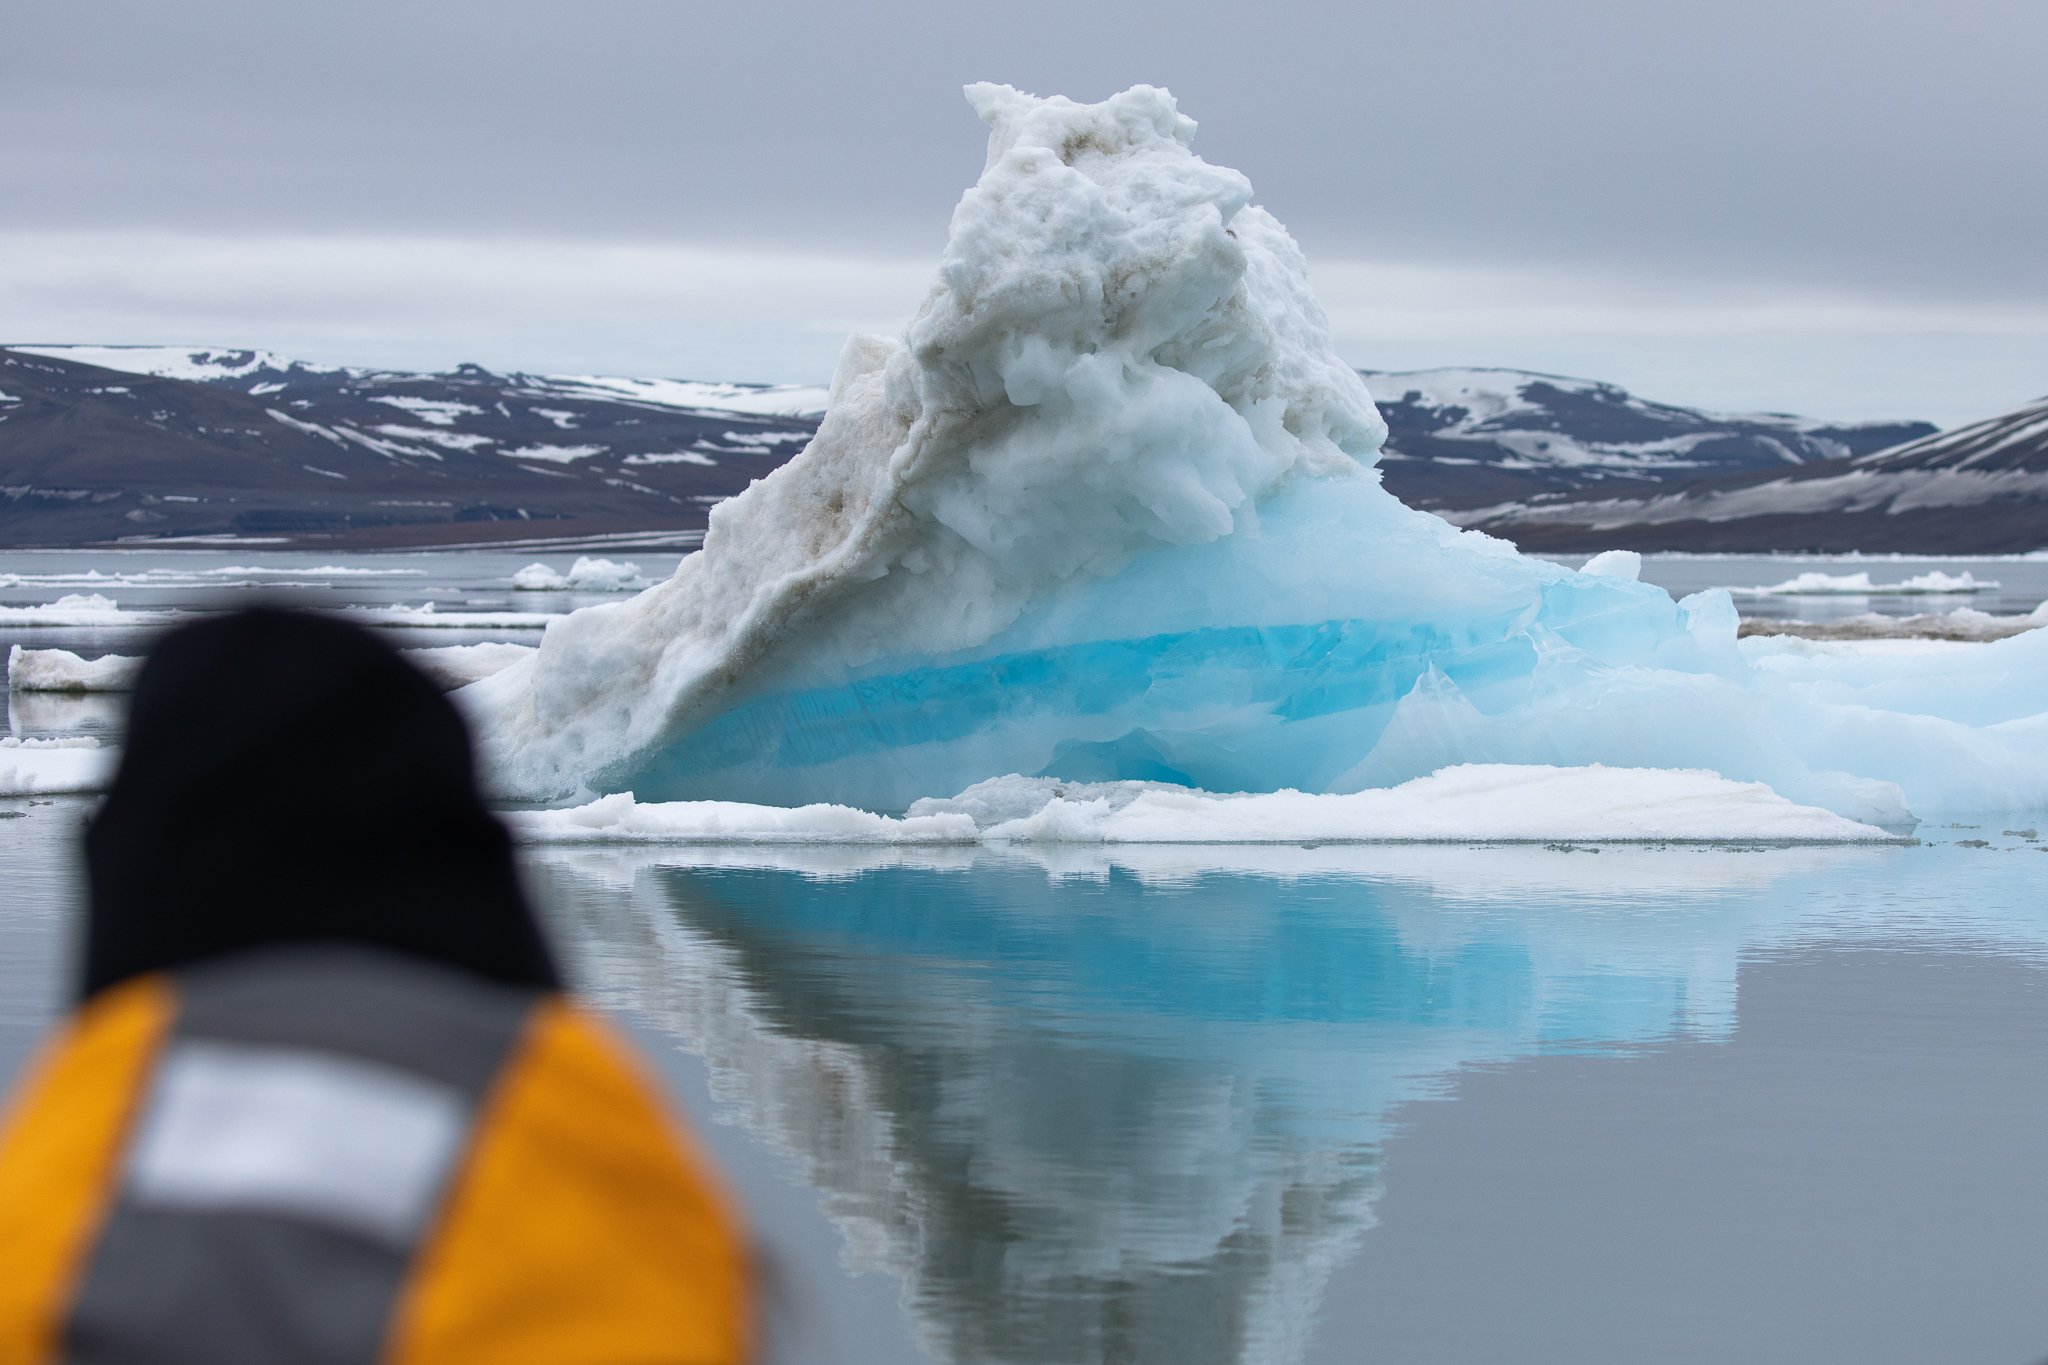 A Quark Expeditions guest is mesmerized at the sight of a blue iceberg in Svalbard, in the heart of Arctic Norway.